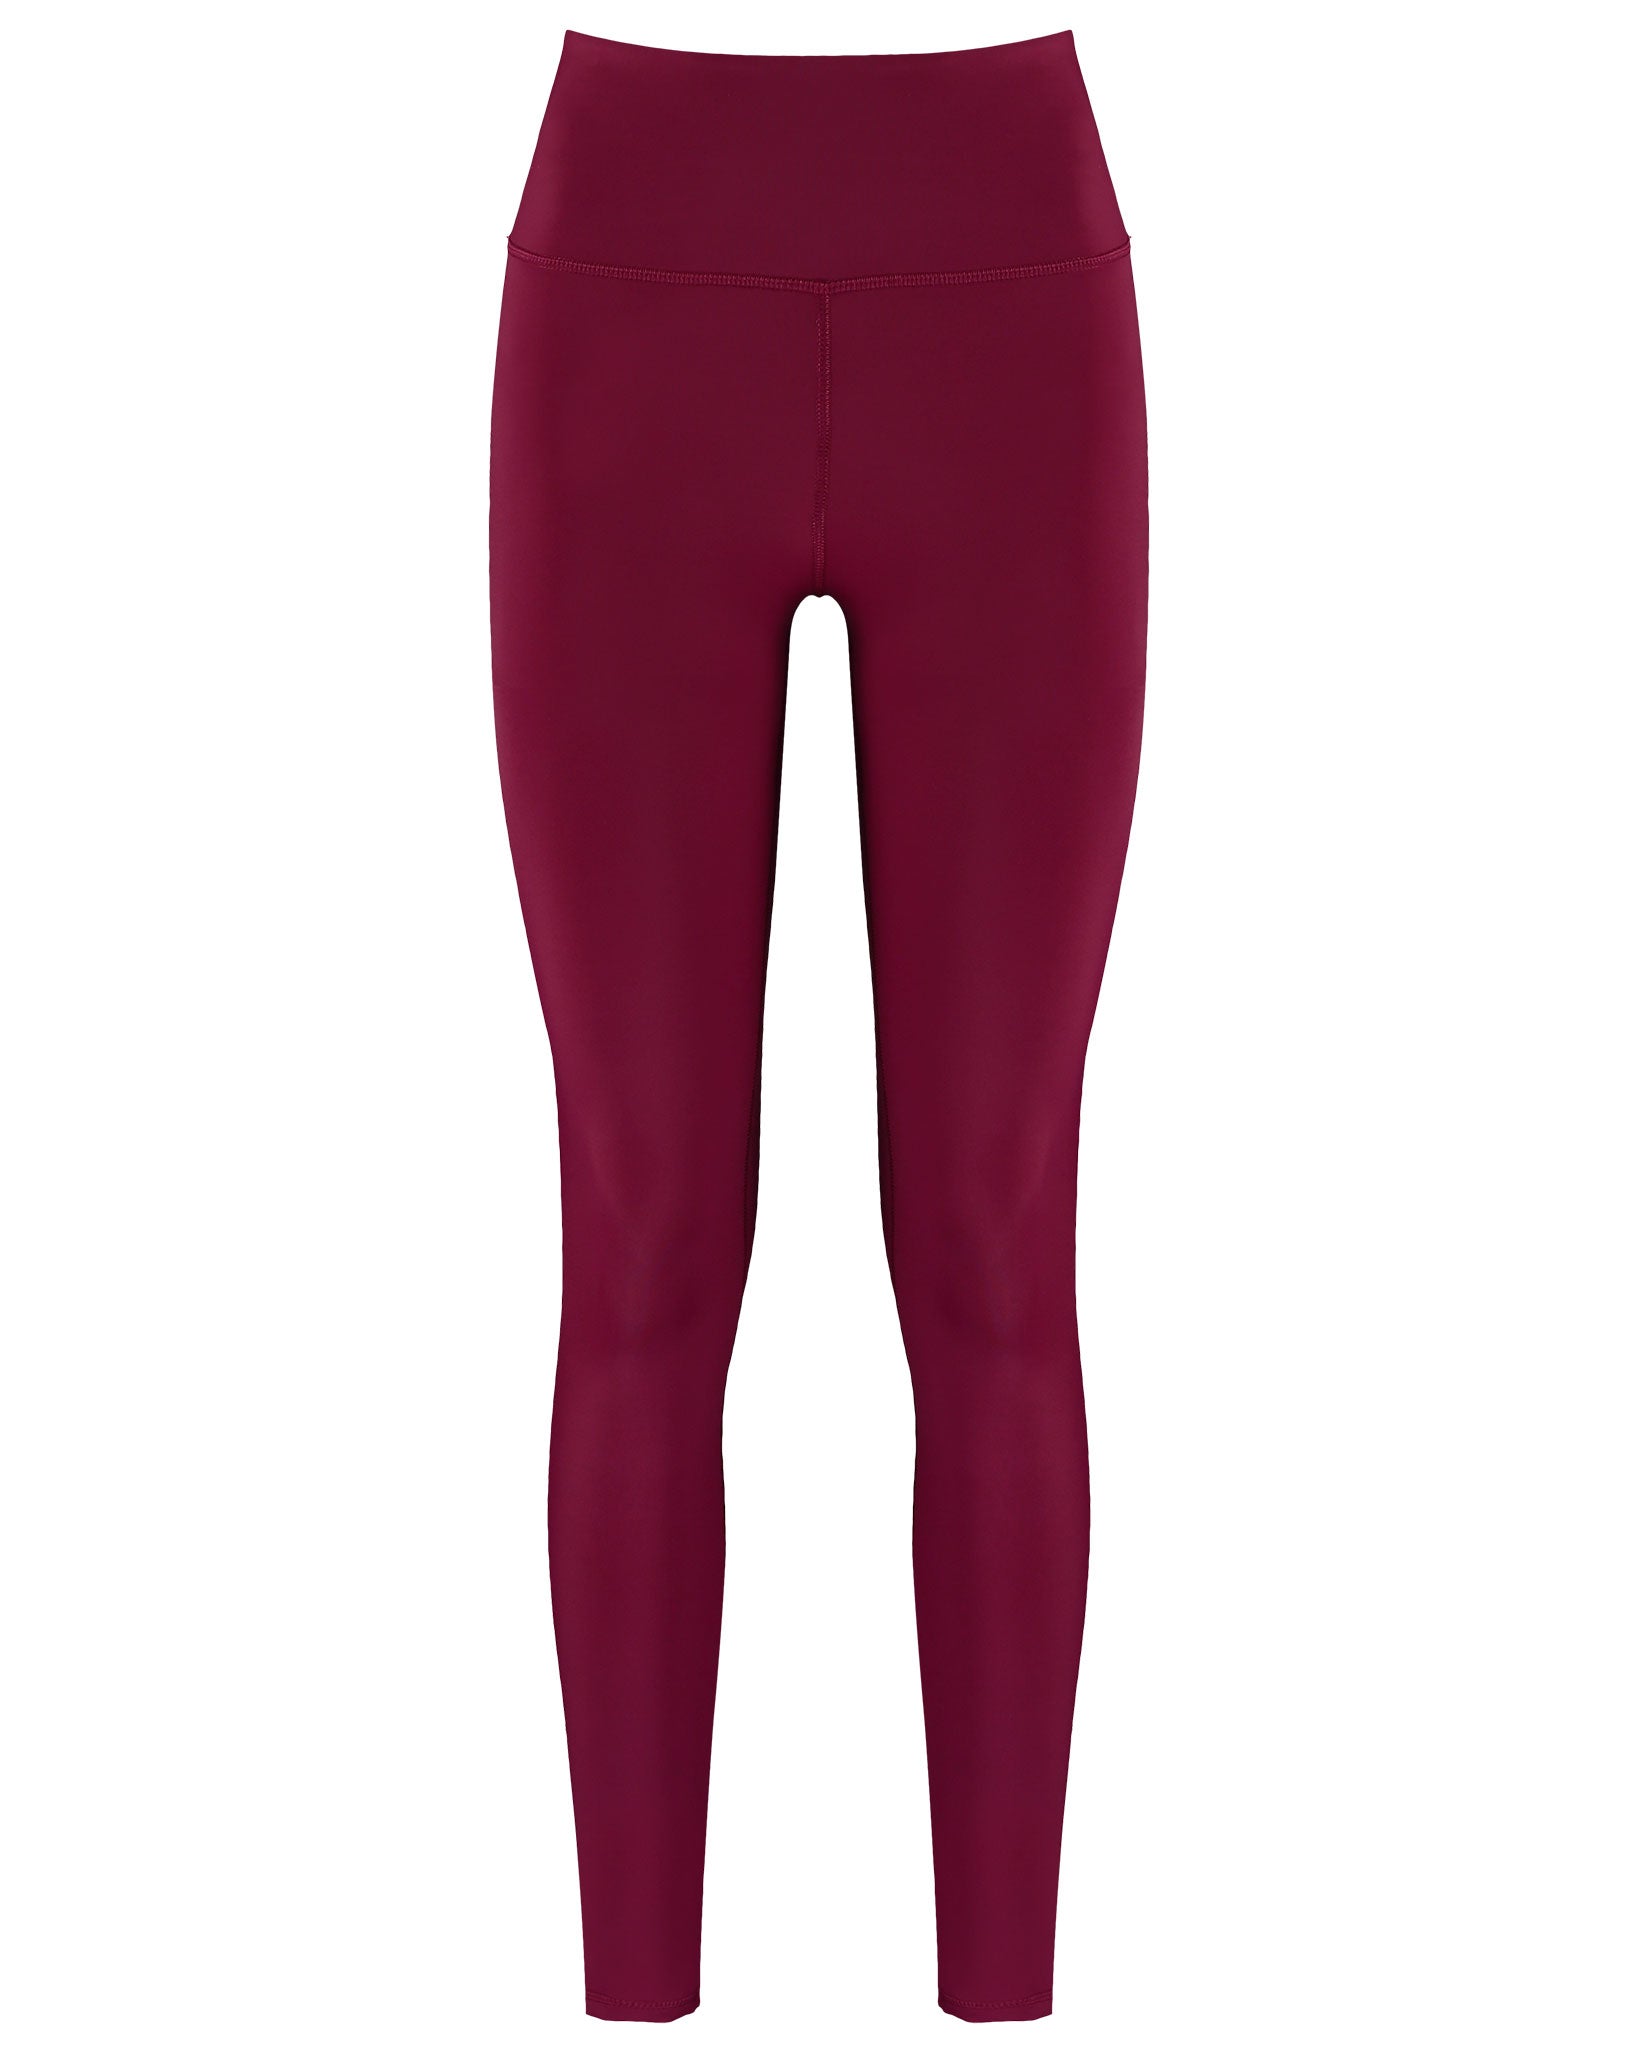 Magenta Leggings Outfit  International Society of Precision Agriculture